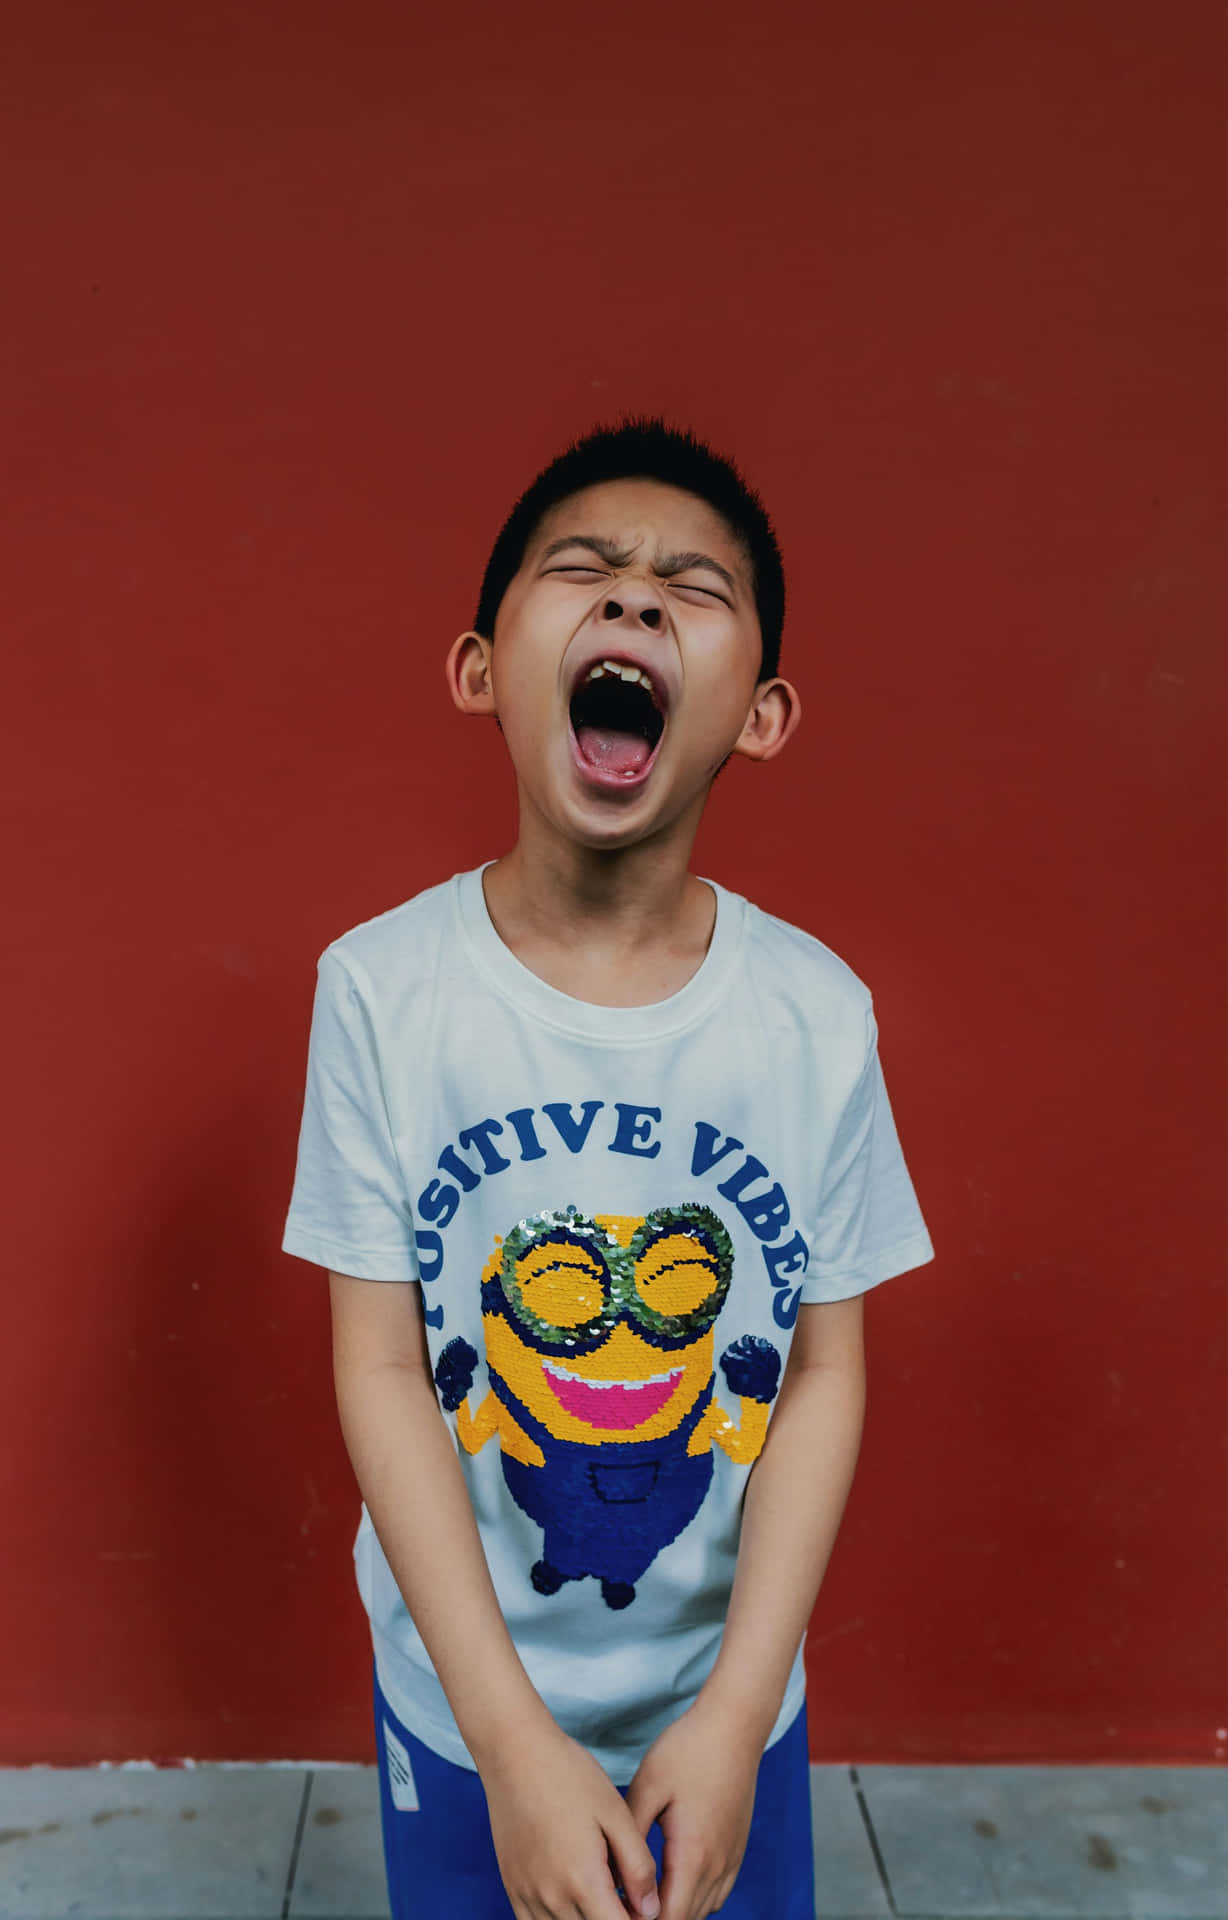 Boy Yawning Against Red Wall Wallpaper